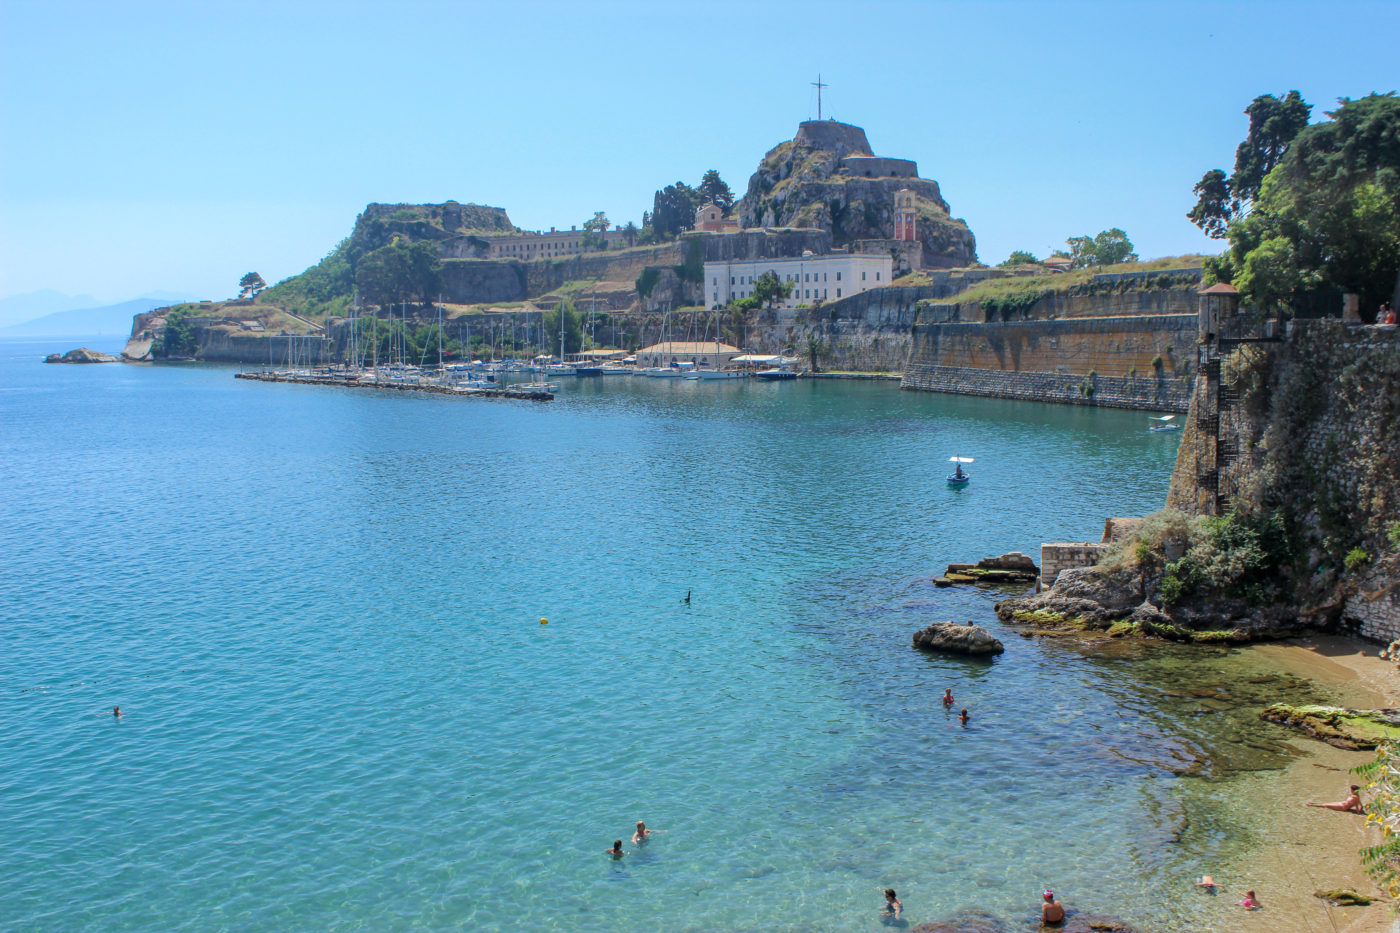 A Splendid Day in Corfu, Greece at Achilleion Palace, Old Town and Beach